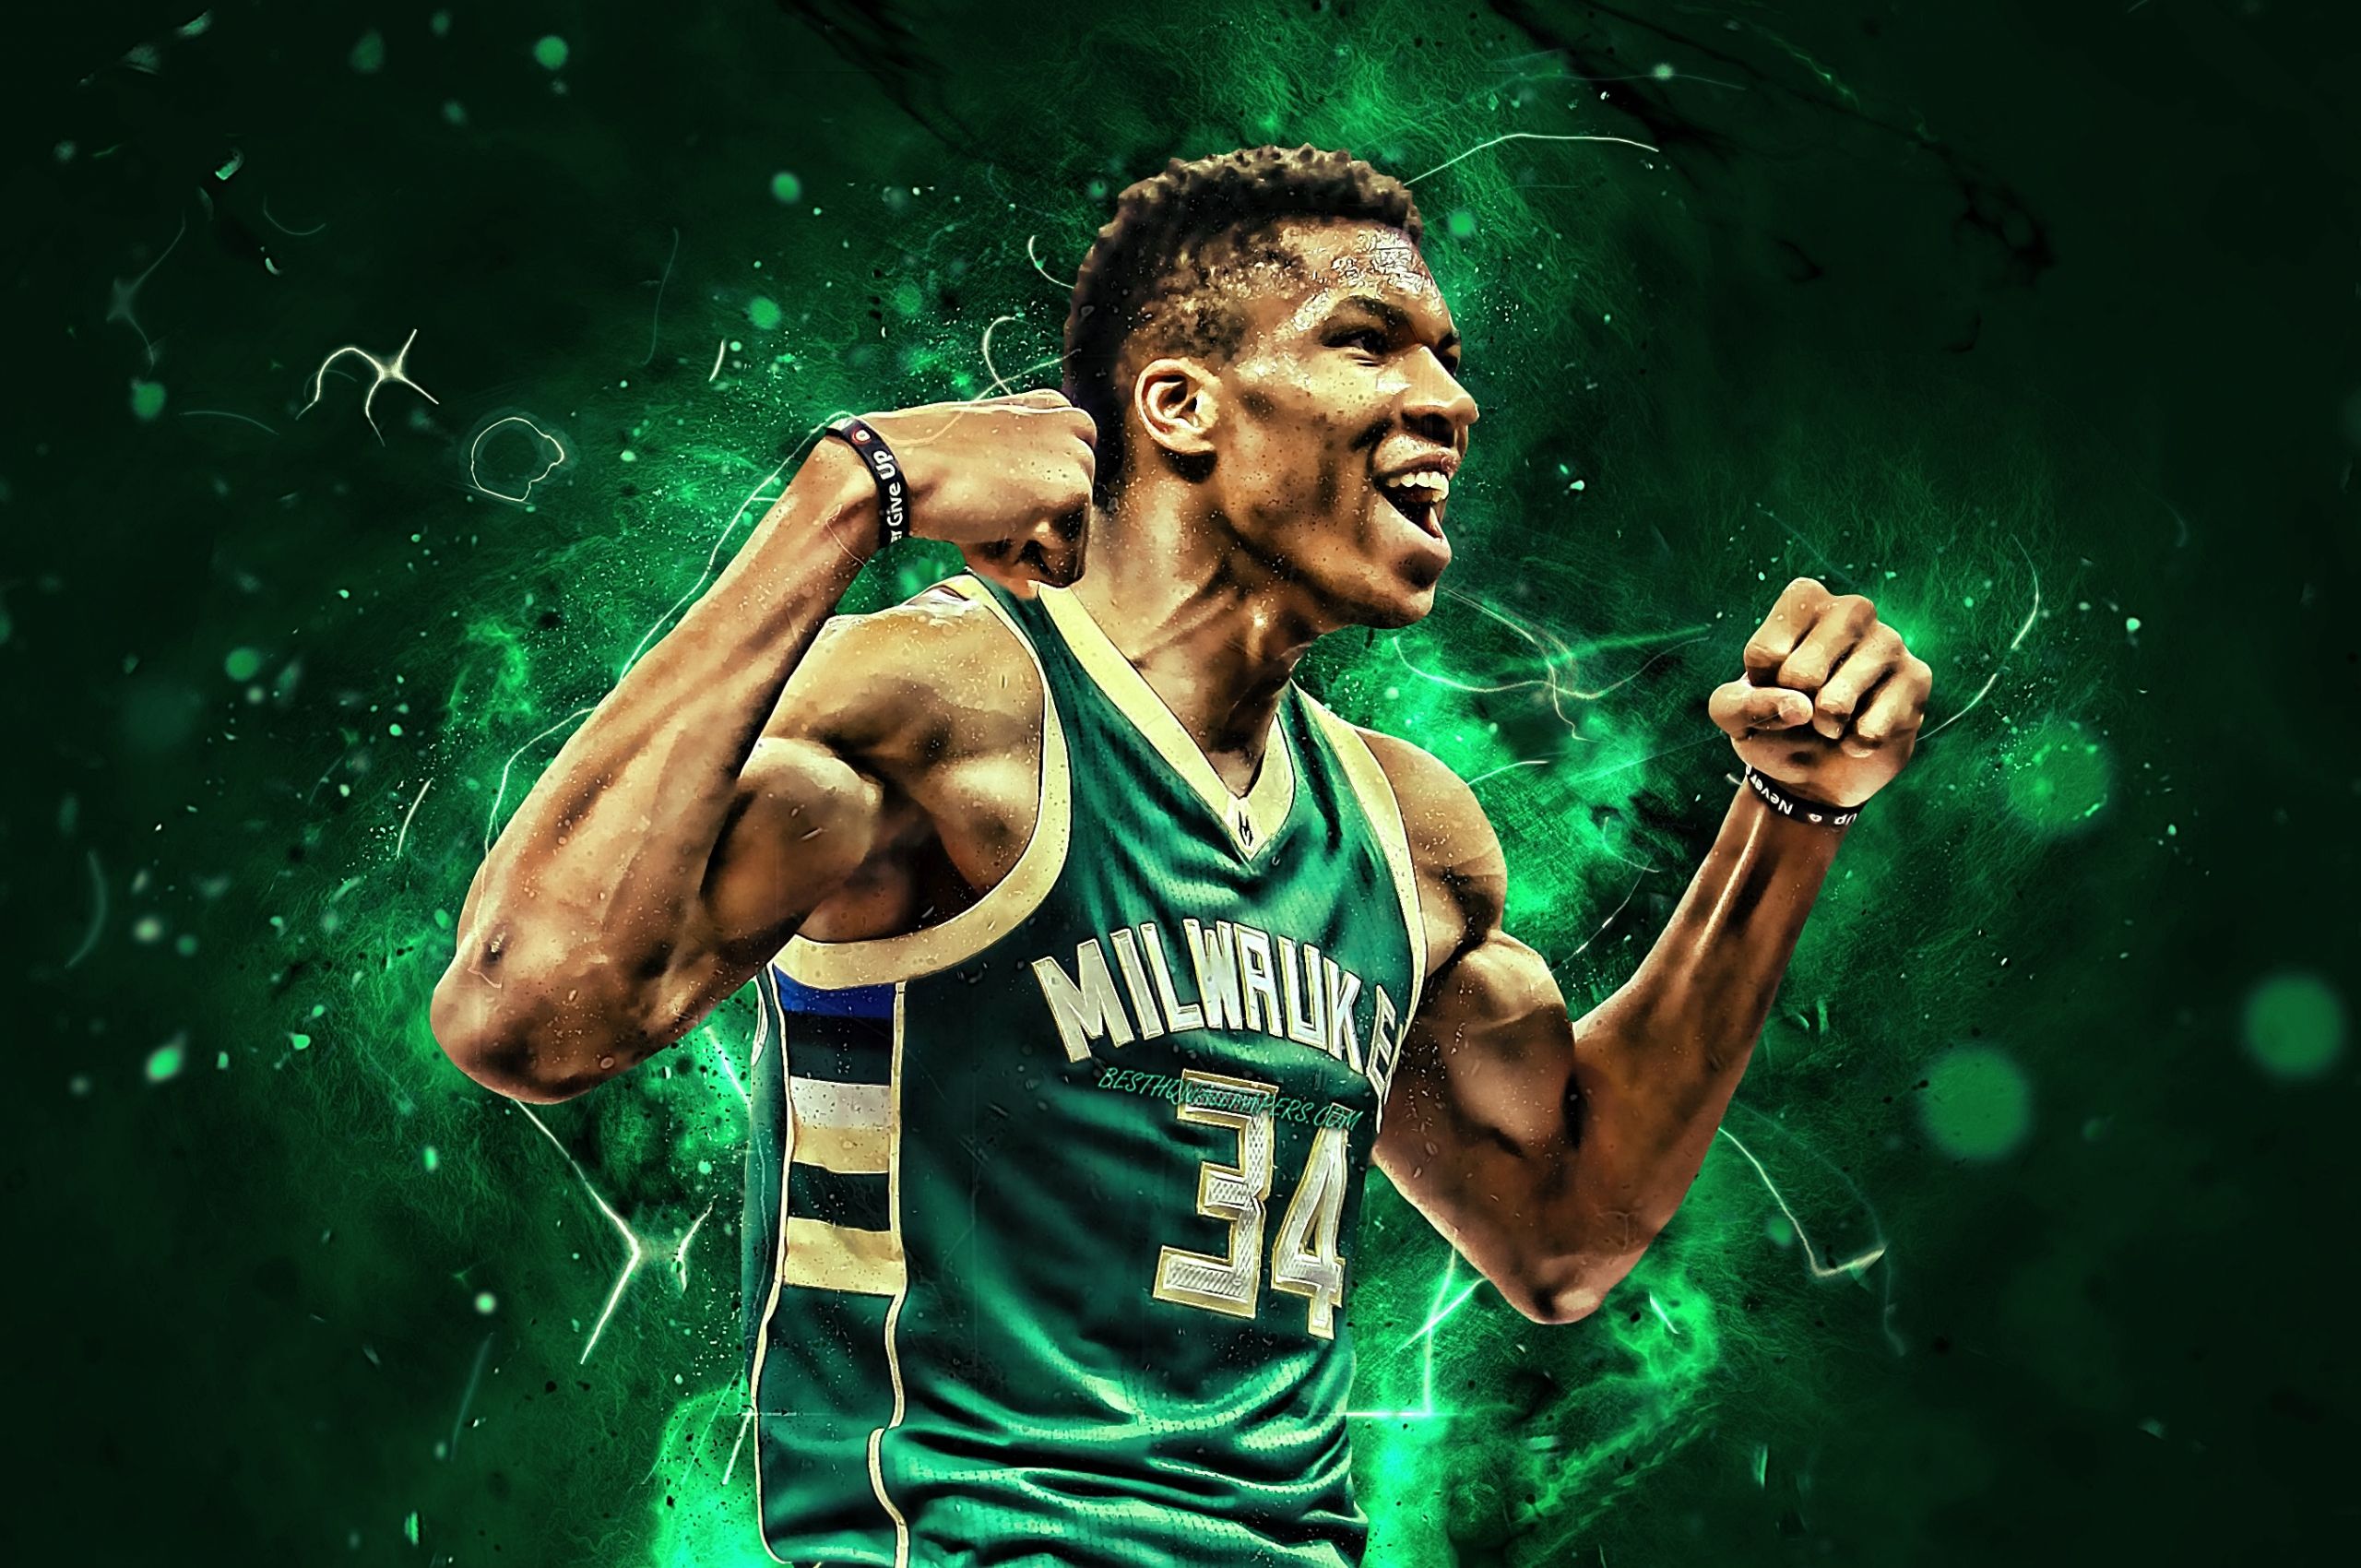 HoopsWallpapers.com – Get the latest HD and mobile NBA wallpapers today! NBA  Teams Archives - HoopsWallpapers.com - Get the latest HD and mobile NBA  wallpapers today!